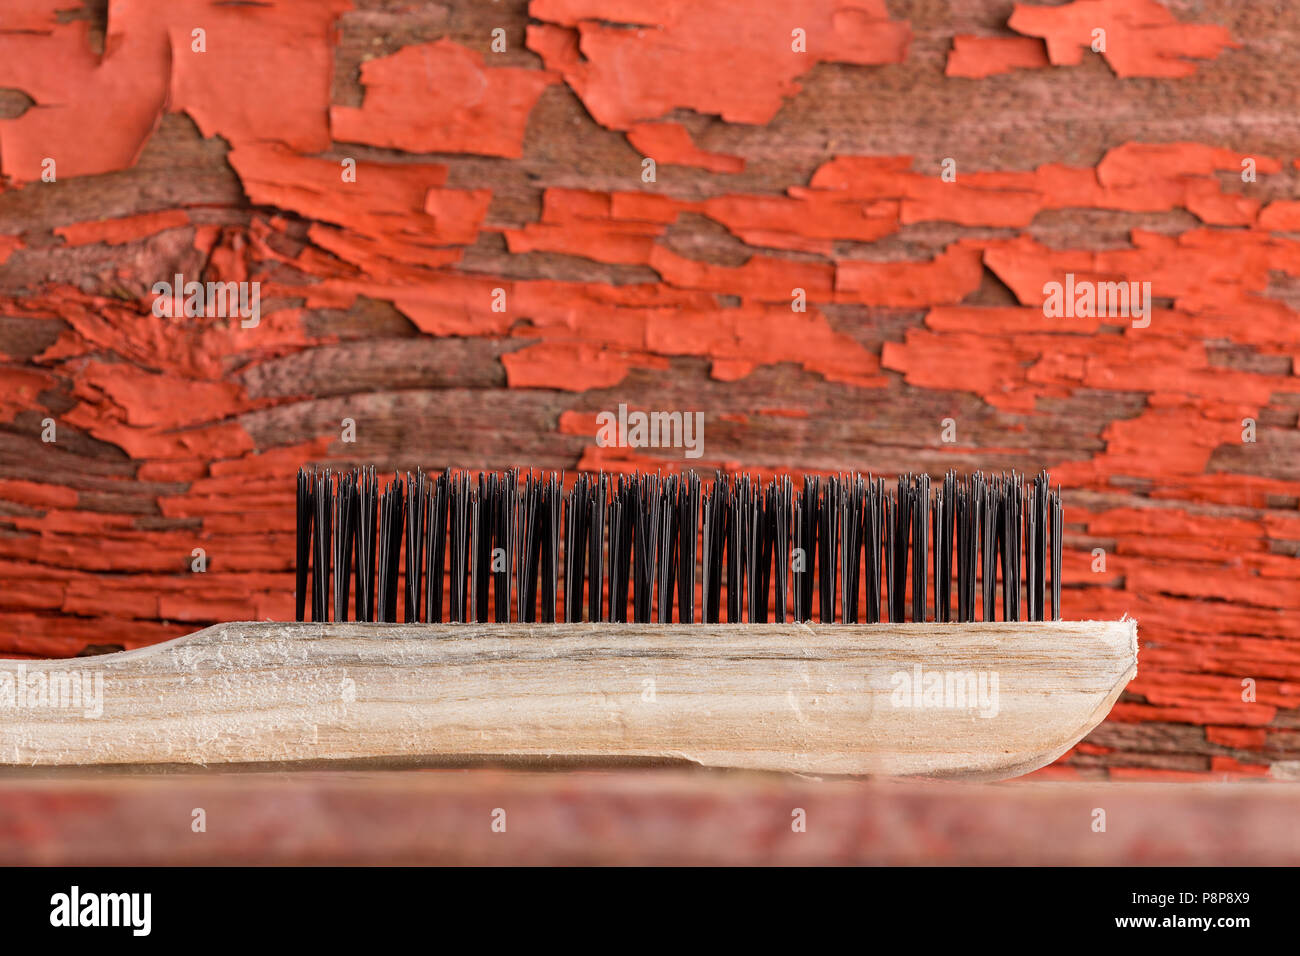 Close up view of wooden cleaning brush against old red painted background Stock Photo